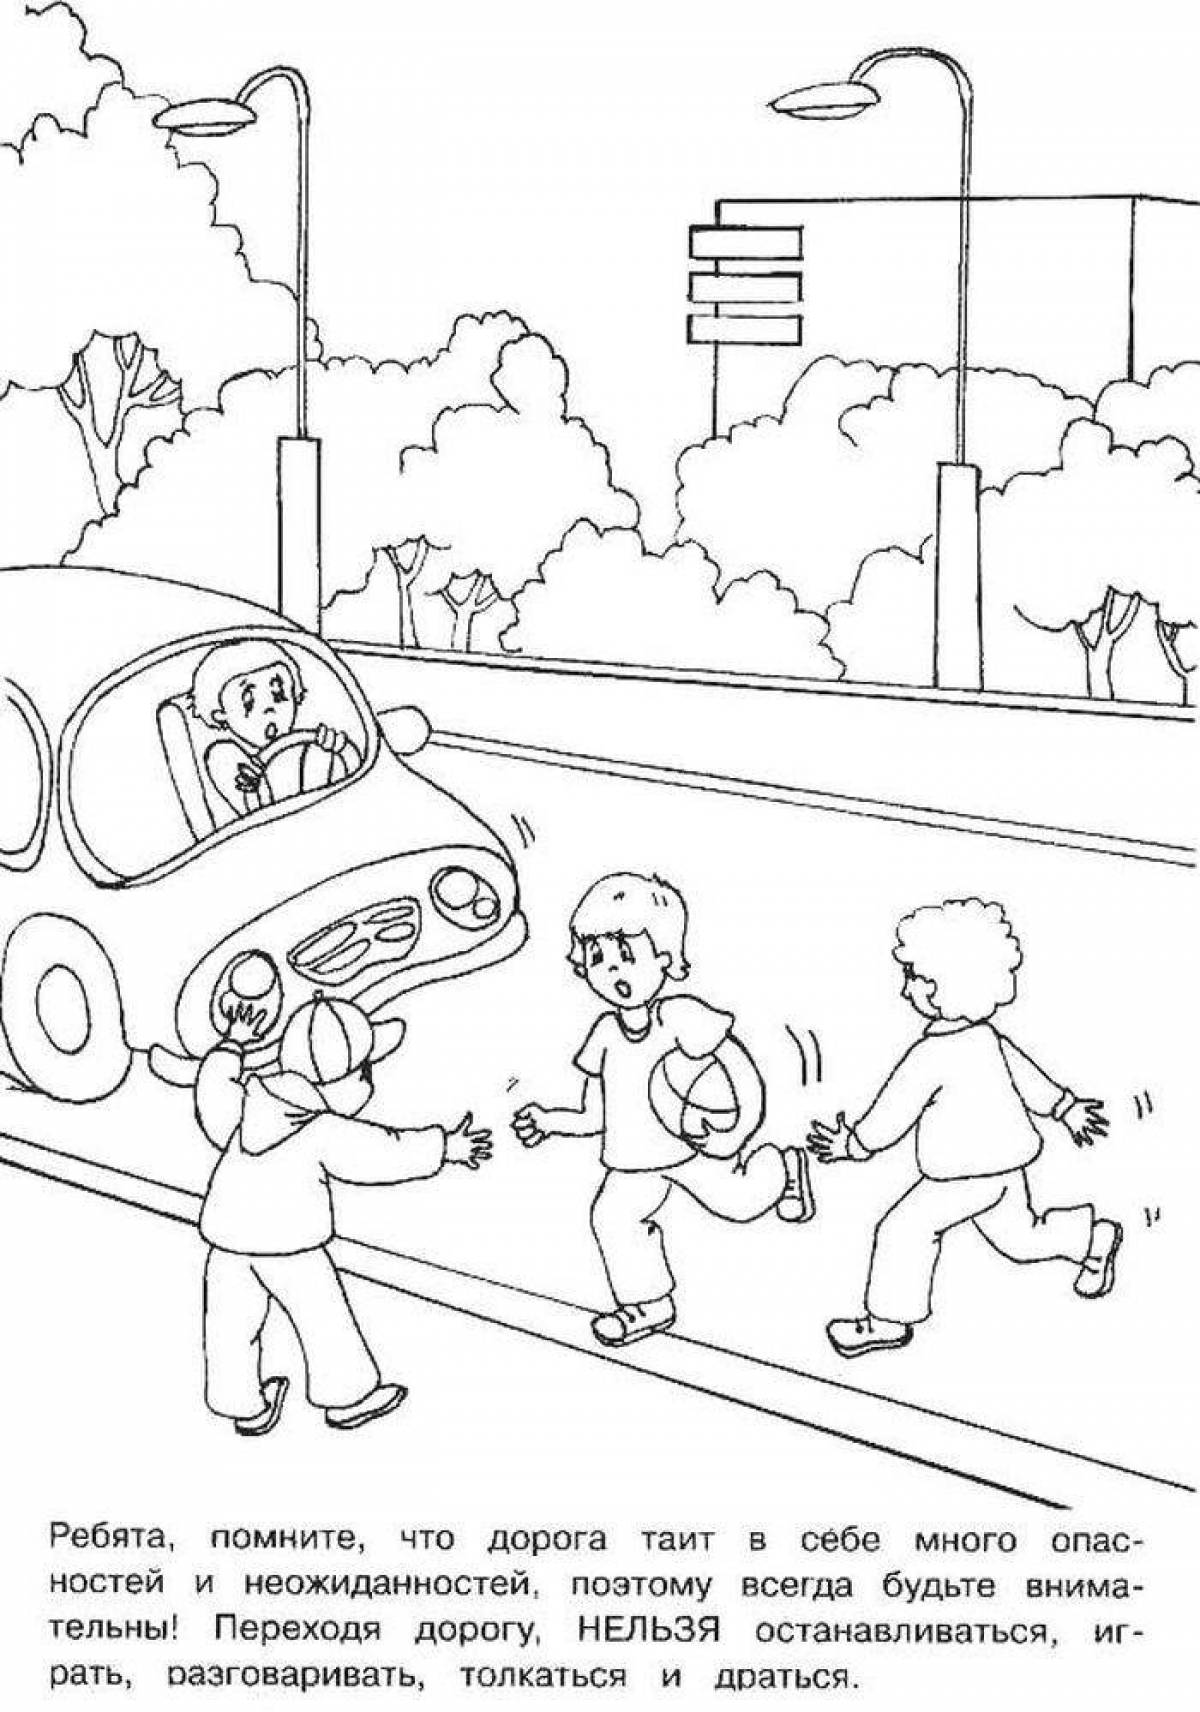 Creative rules of the road coloring pages for preschoolers